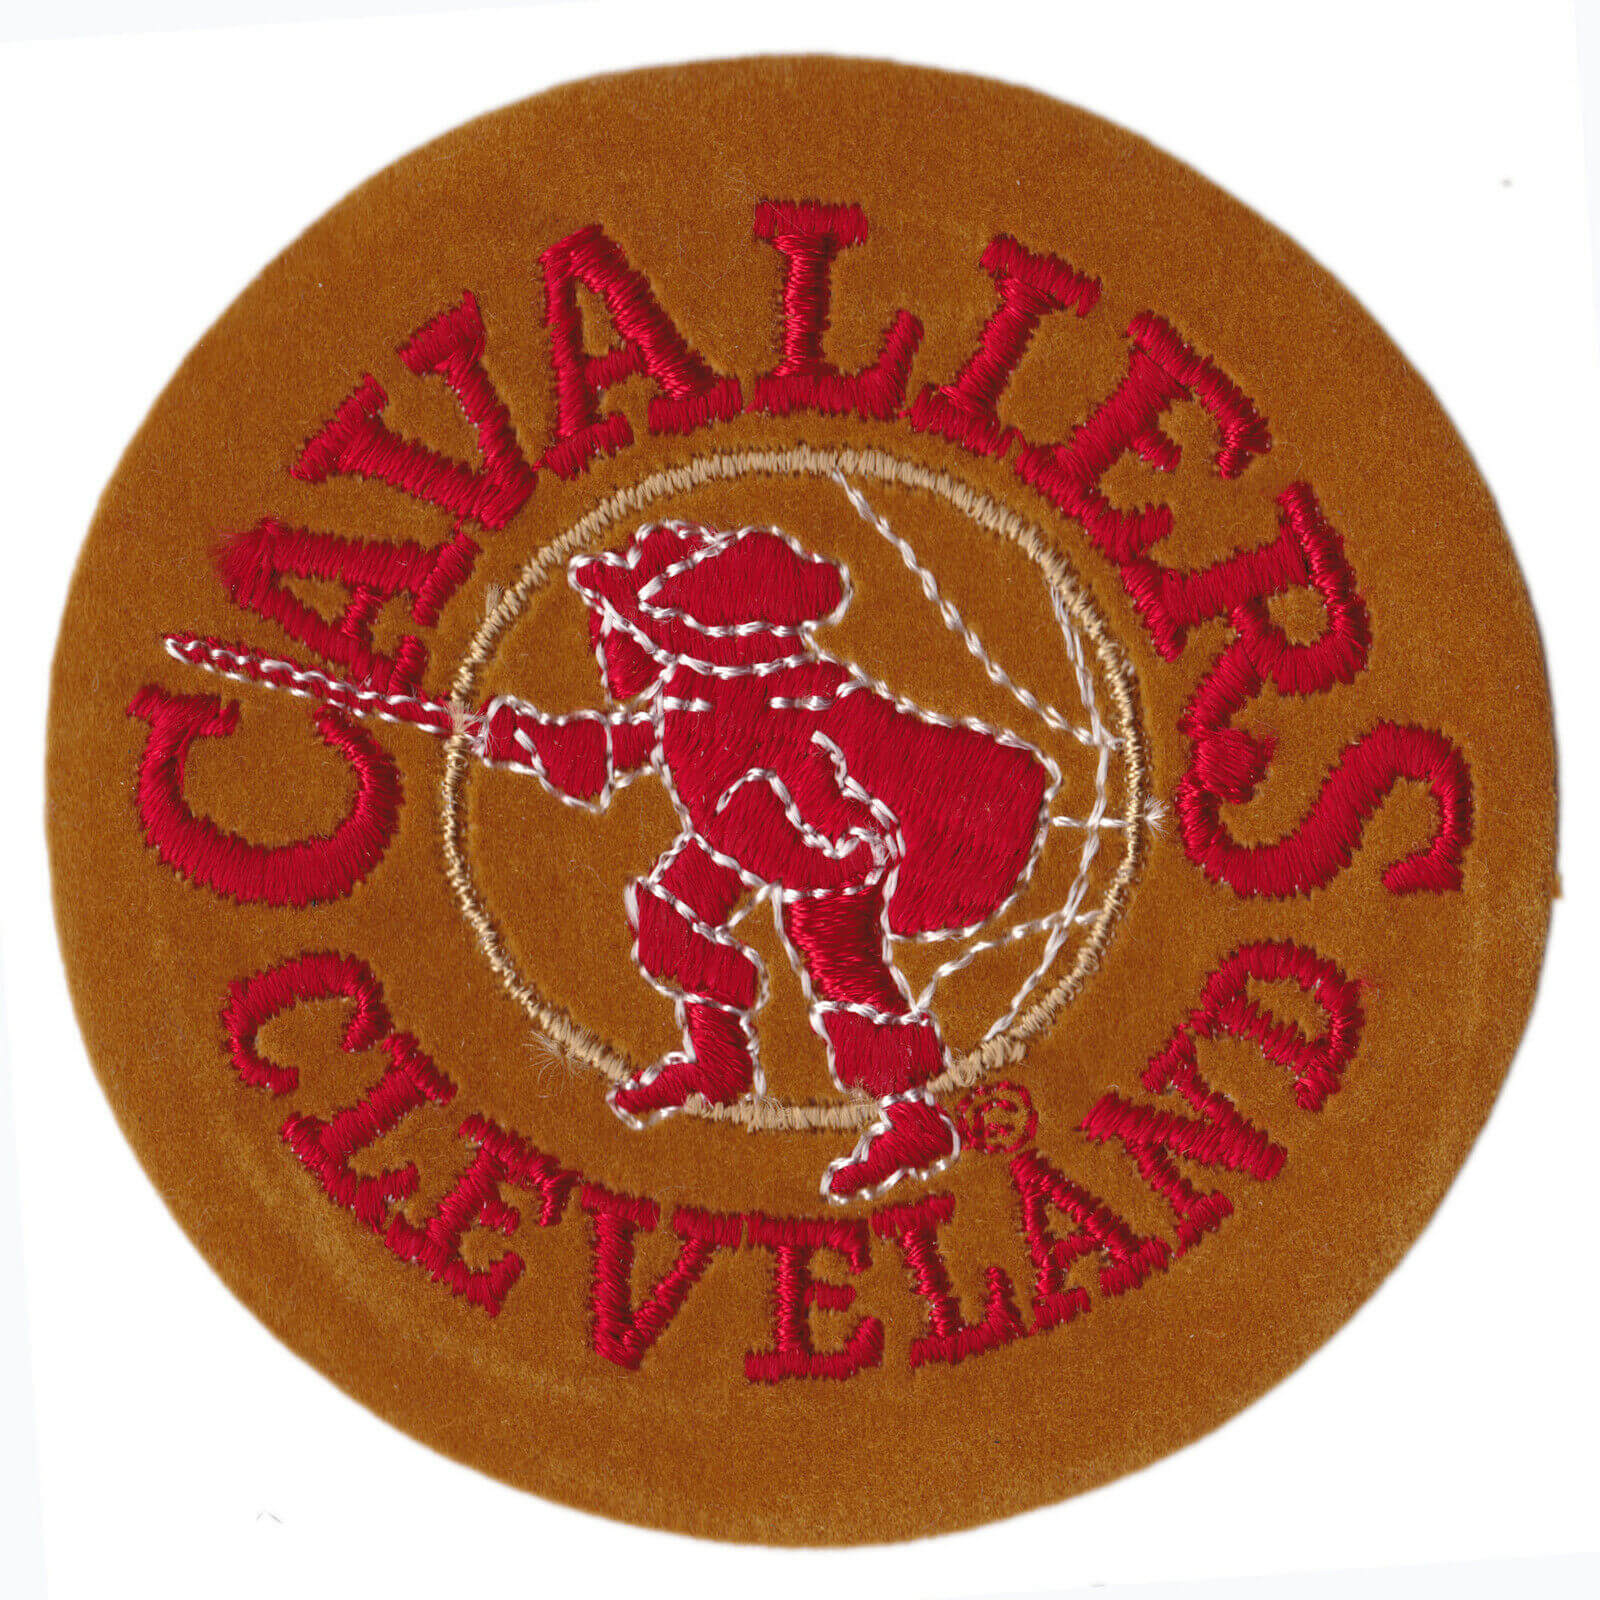 Cleveland Cavaliers Logo Primary Team Patch - Maker of Jacket